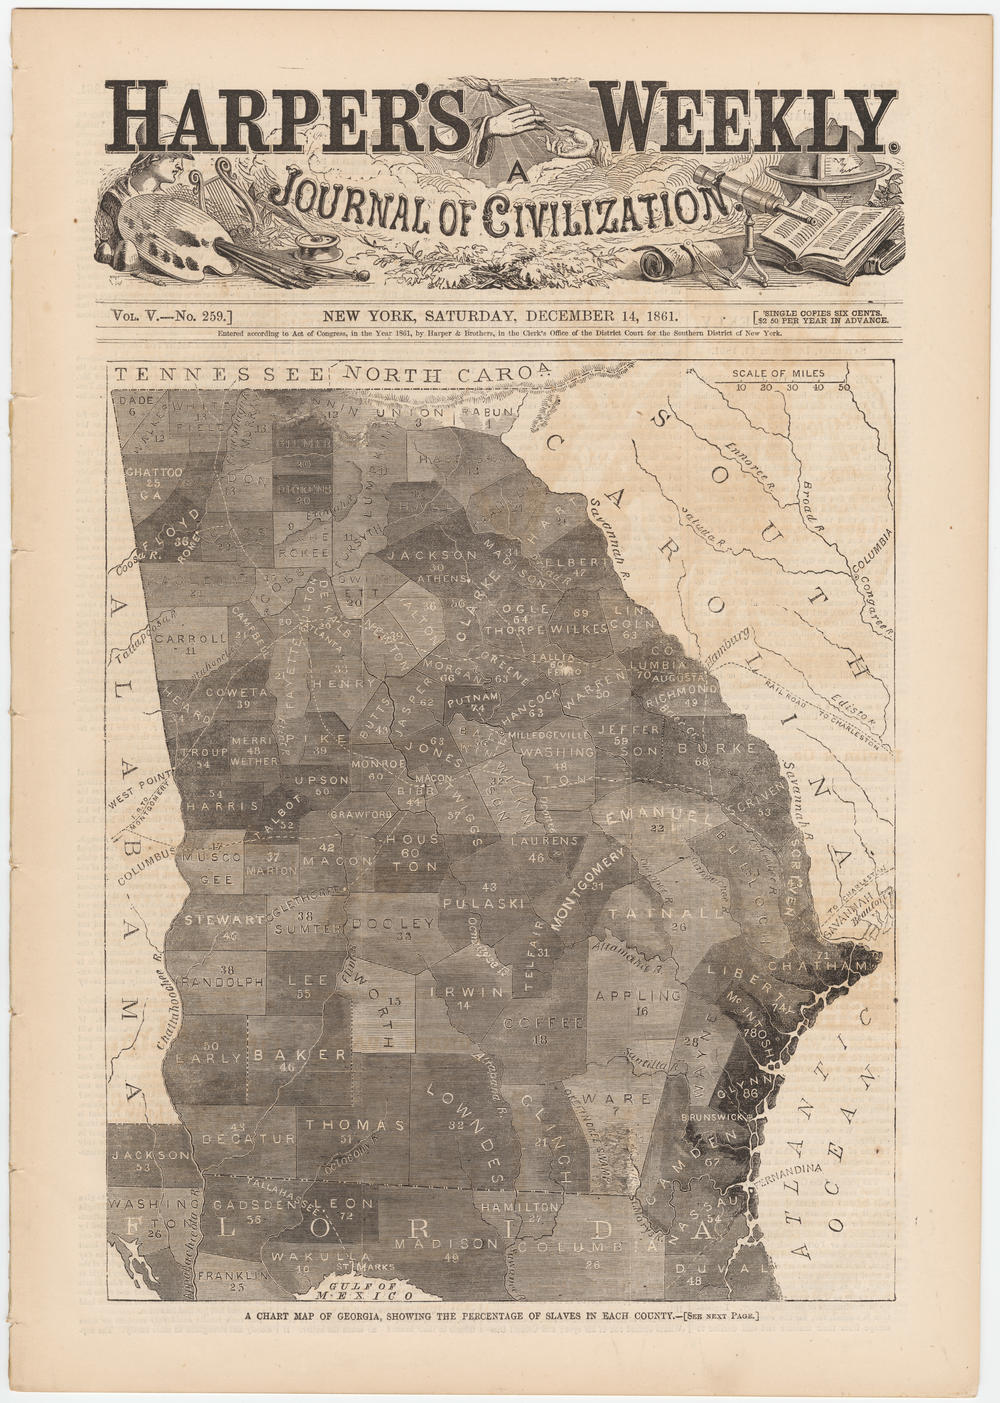 Georgia Slavery Map from 1861 published in Harper's Weekly, December 14, 1961, about a decade after a slave named Ellick was hanged in Lawrenceville for killing a man in self-defense.